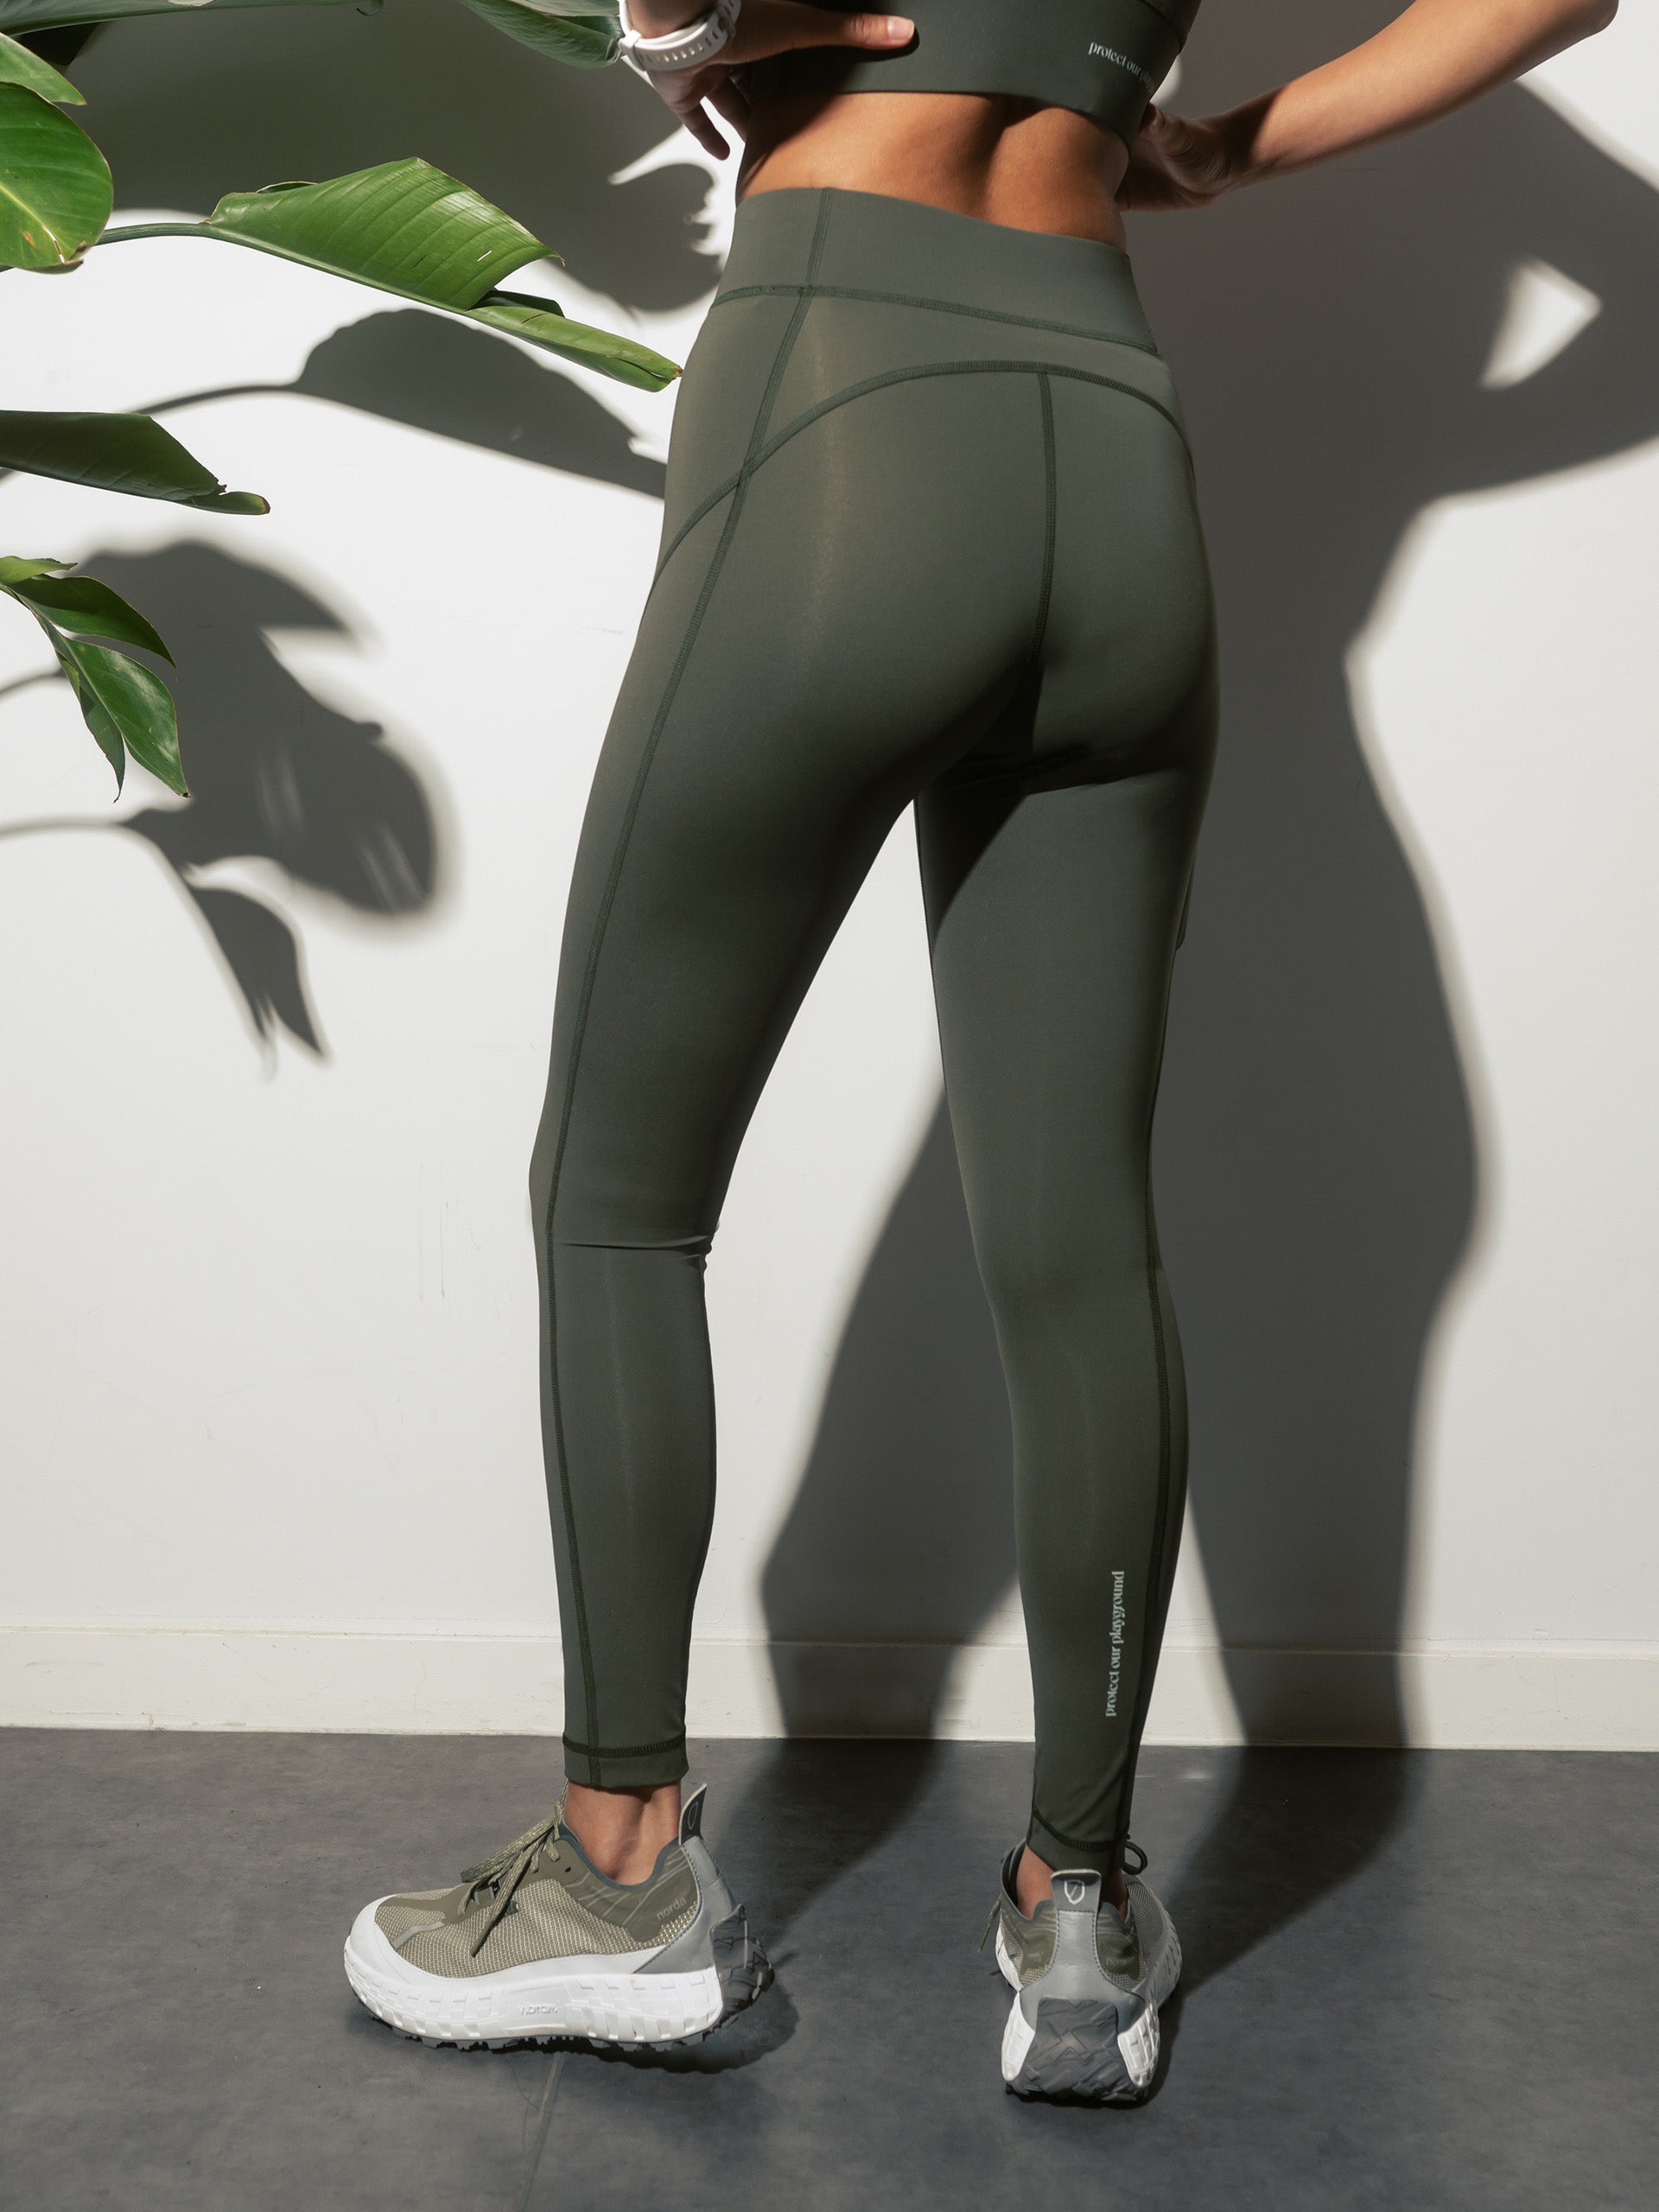 Get in Shape Legging  Running & Yoga Legging - Recycled and recyclable -  Circle Sportswear